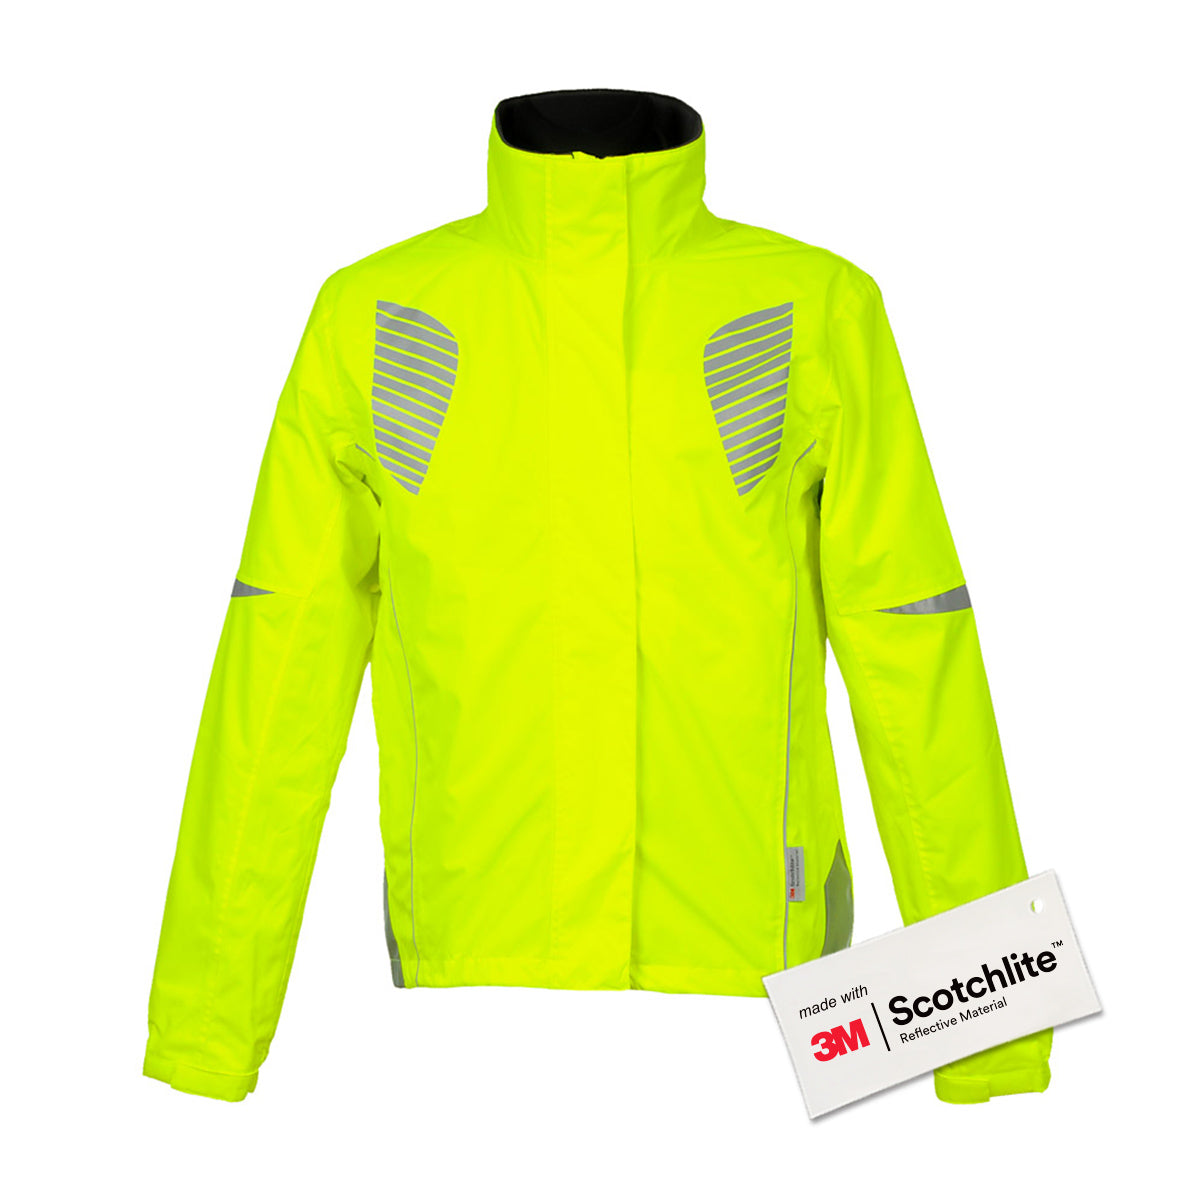 Image of front of cycling jacket.